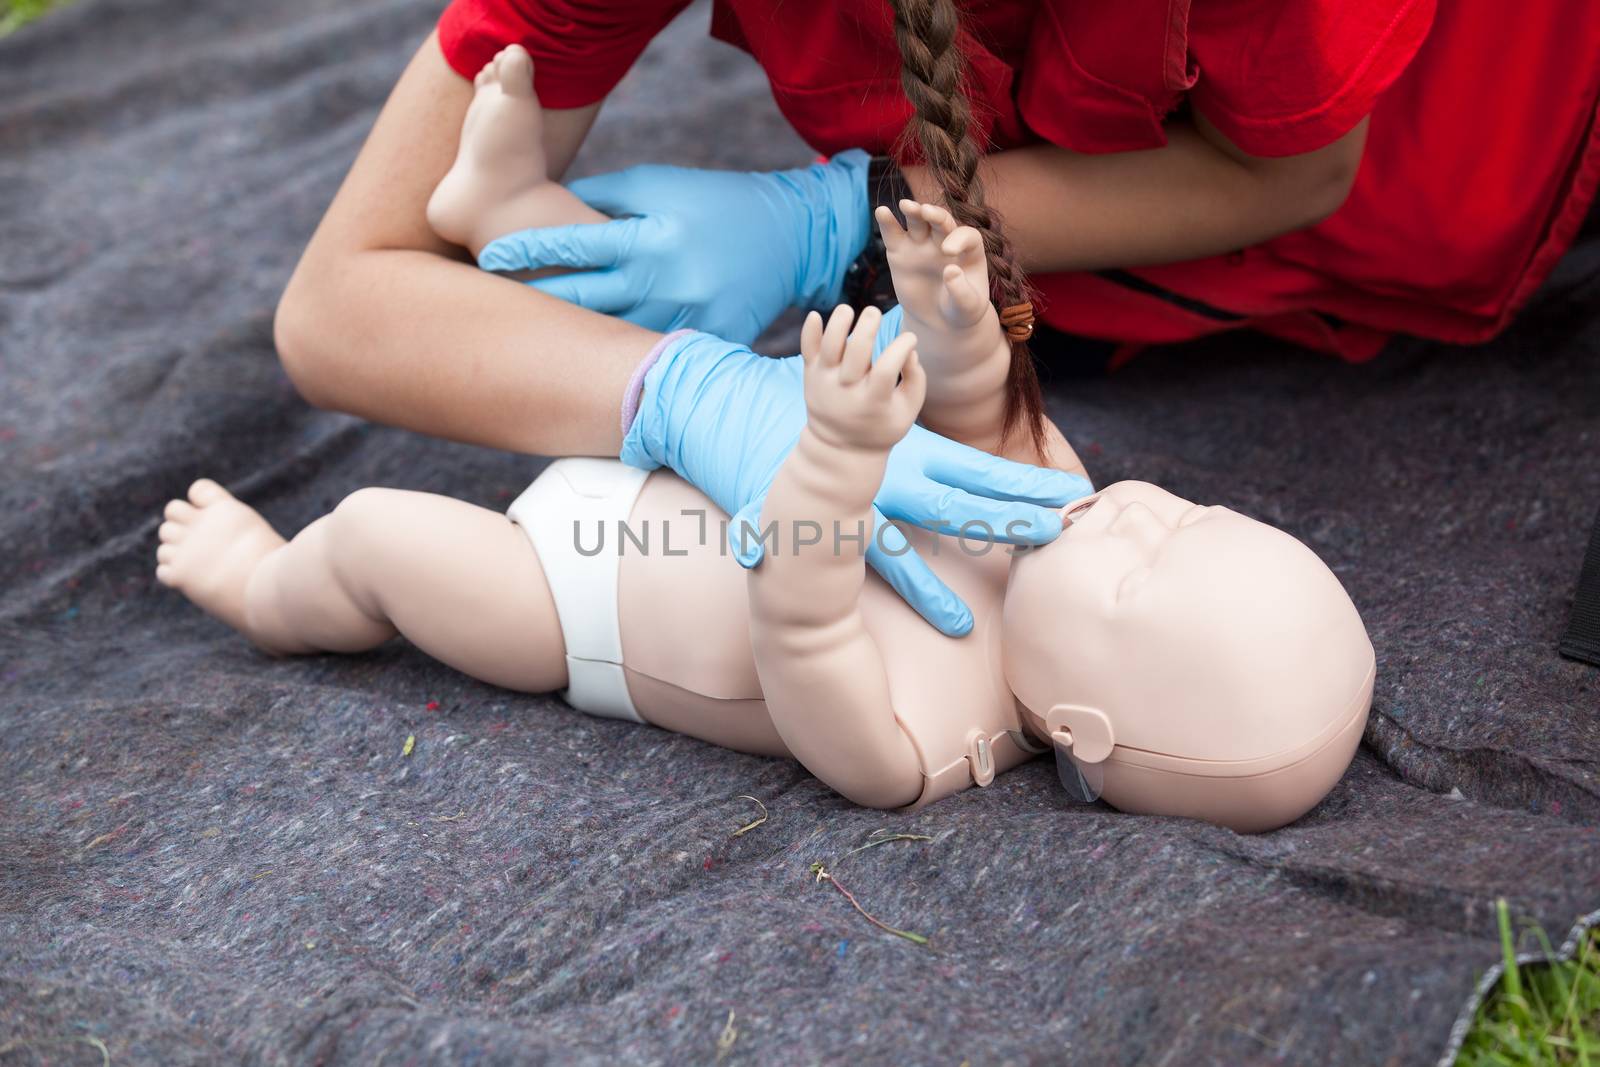 Baby CPR dummy first aid training by wellphoto